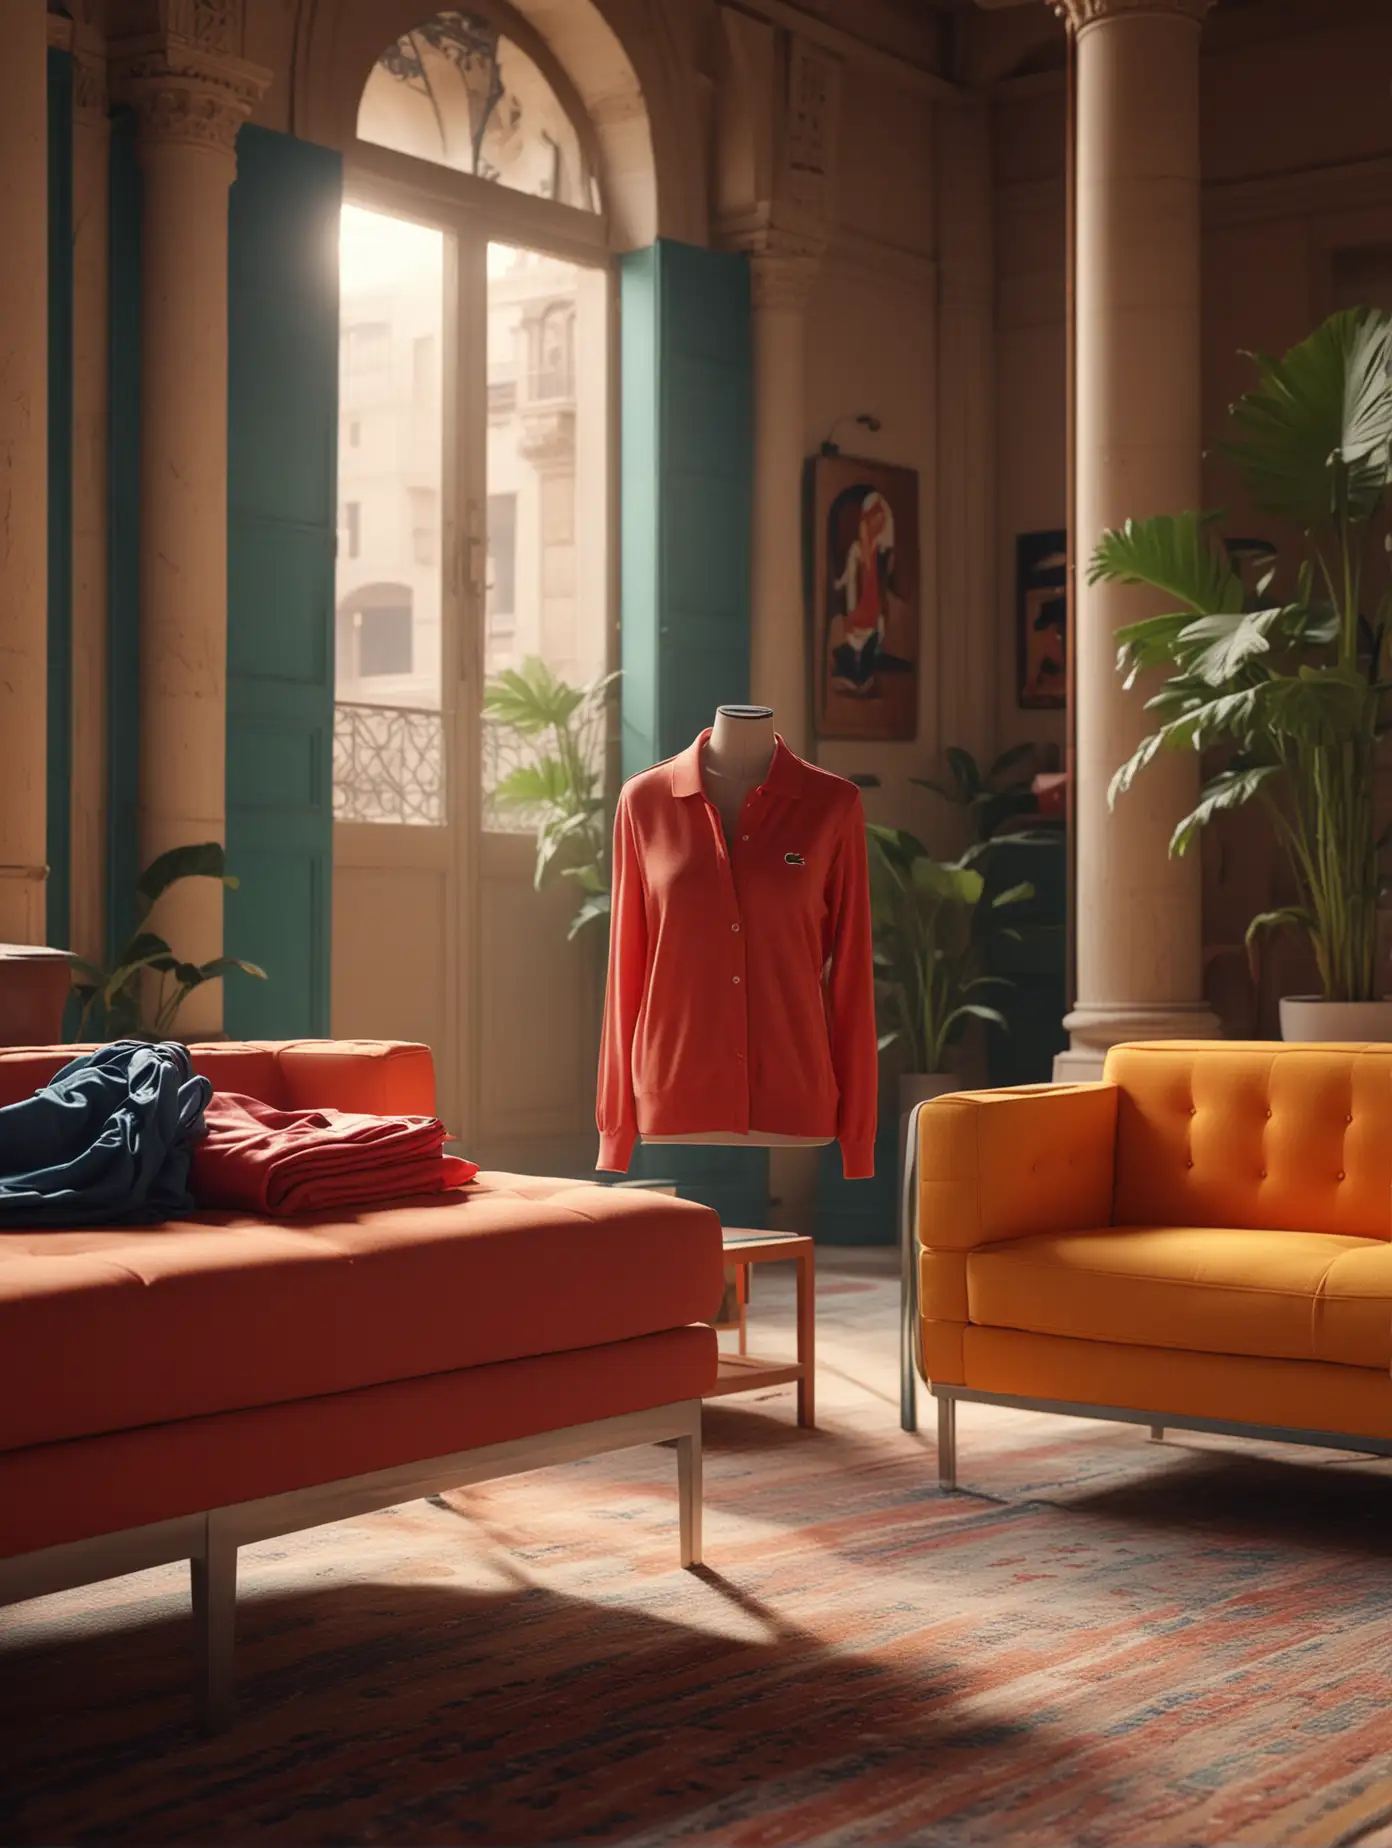 Vibrant Lacoste Clothing Display in Luxurious Egyptian Interior